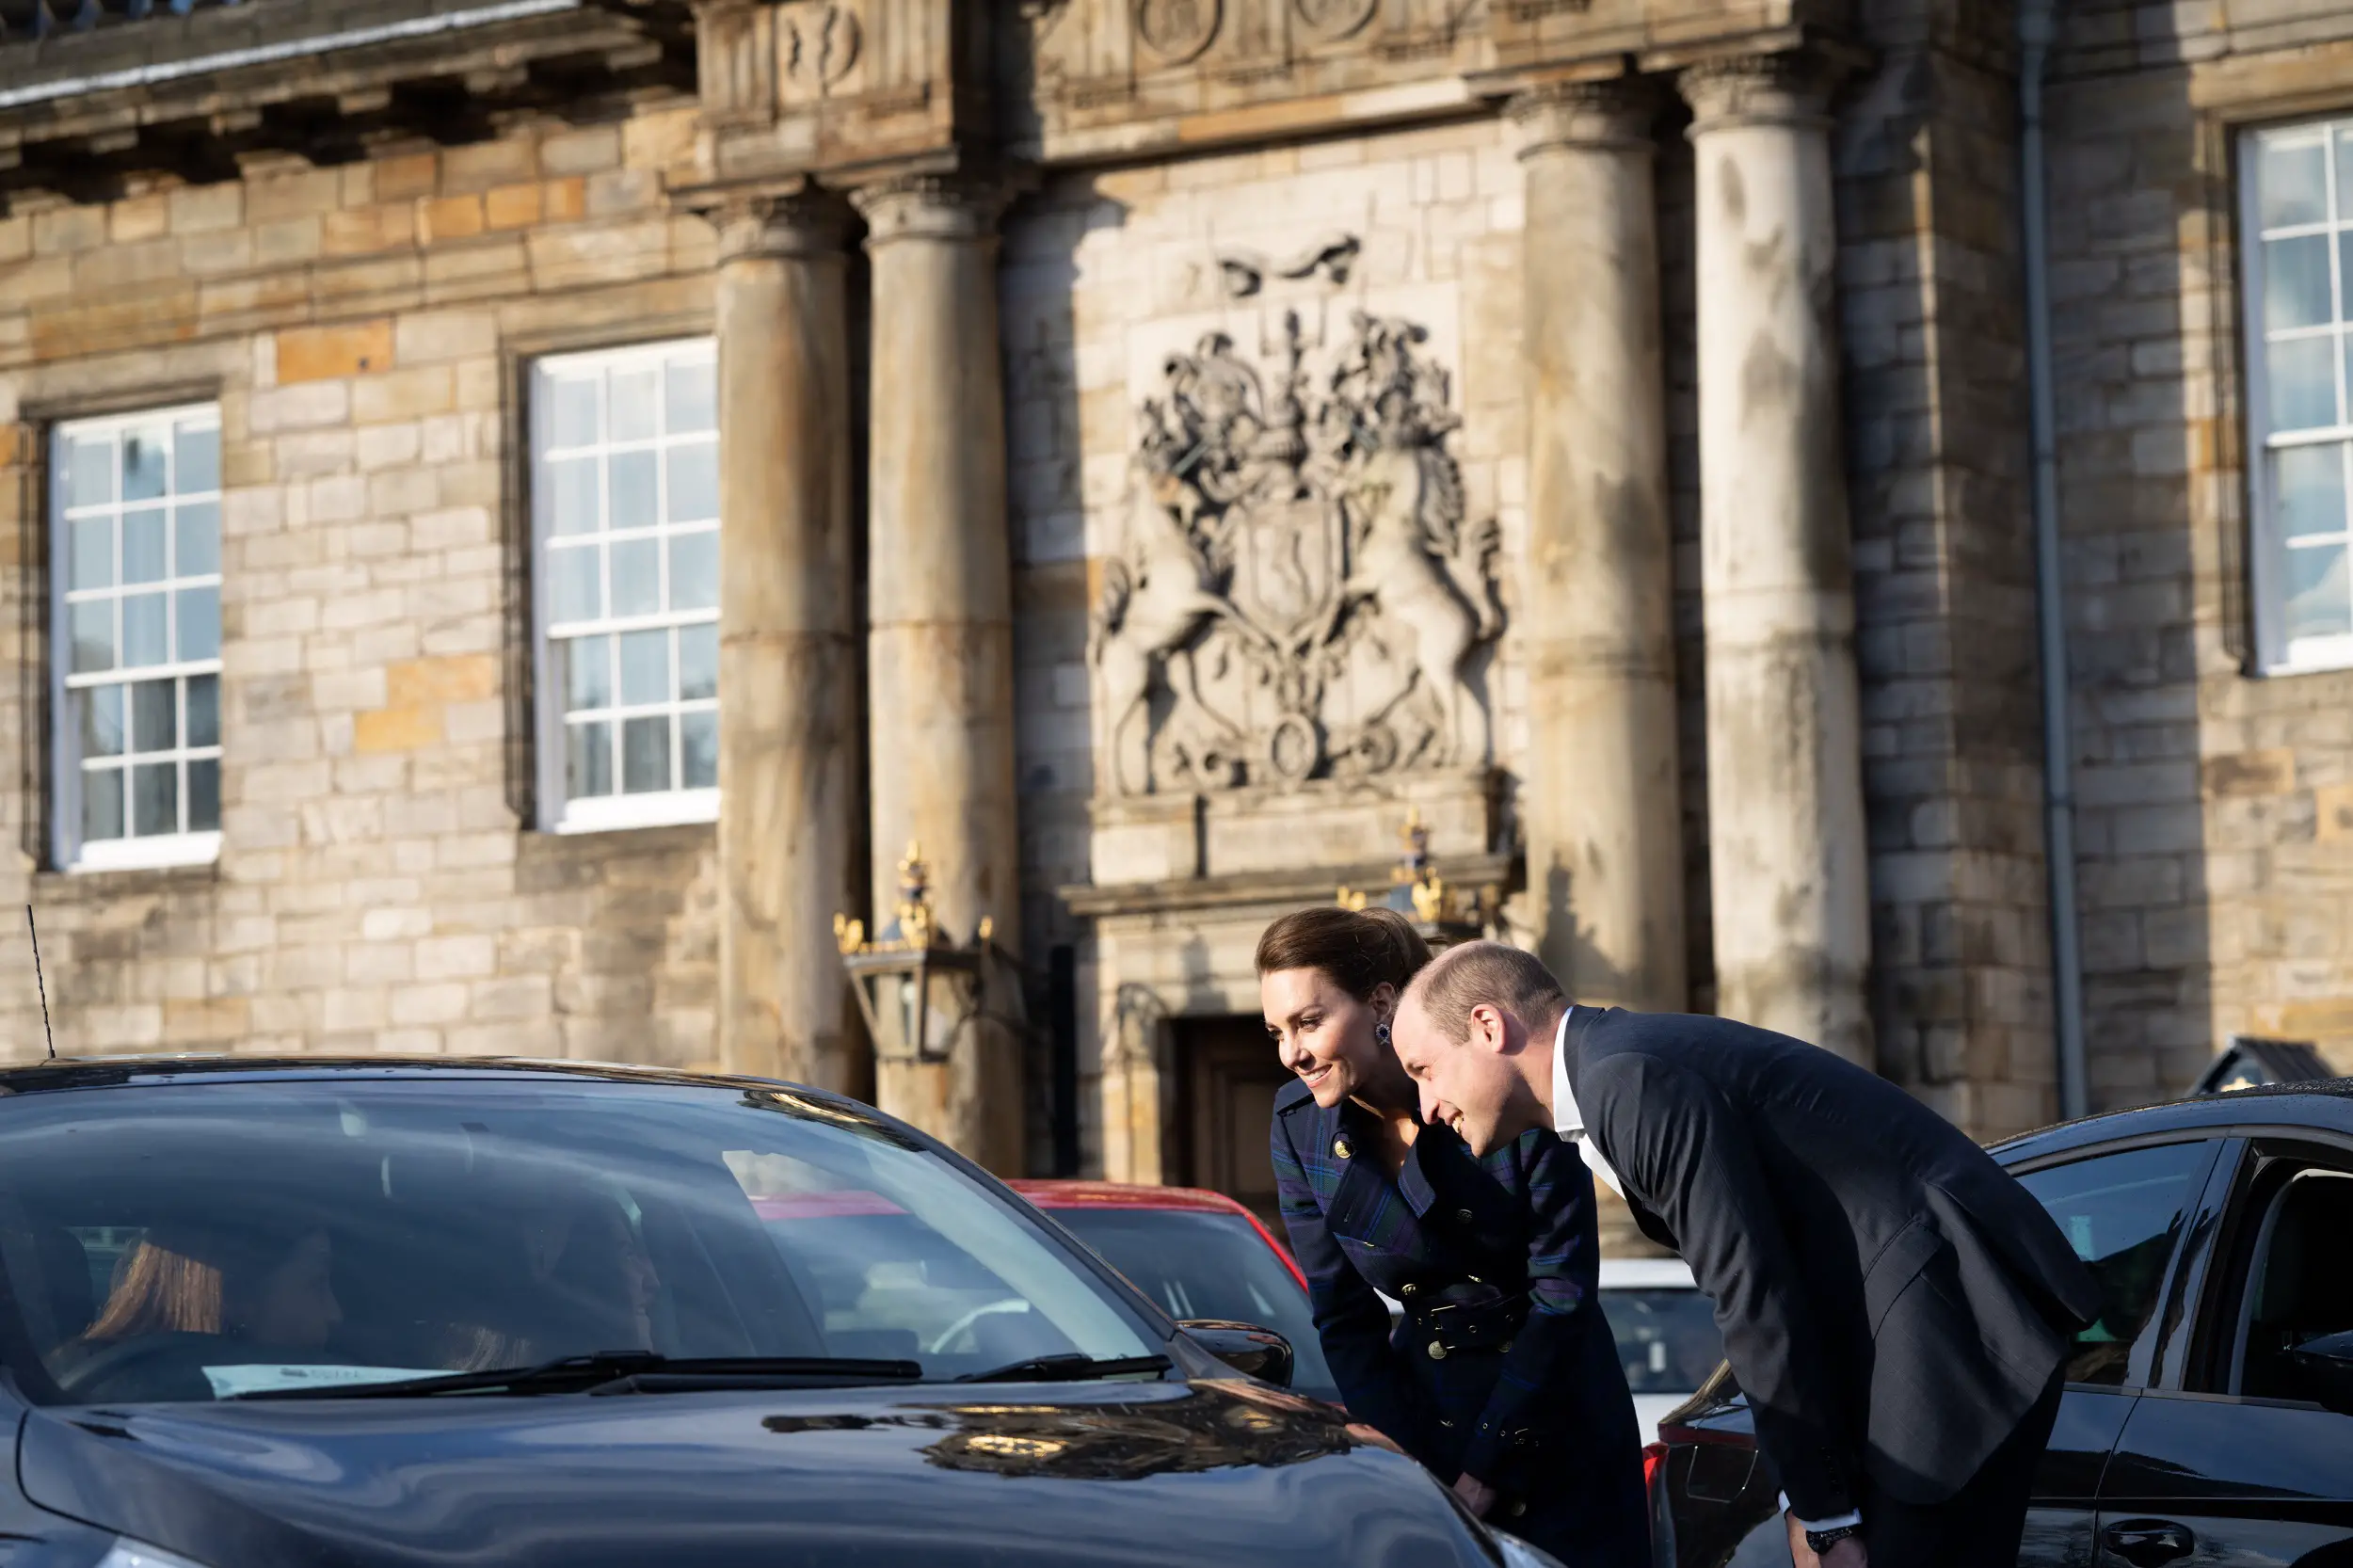 The Duke and Duchess of Cambridge welcomed The NHS Staff at the Palace of Holyroodhouse